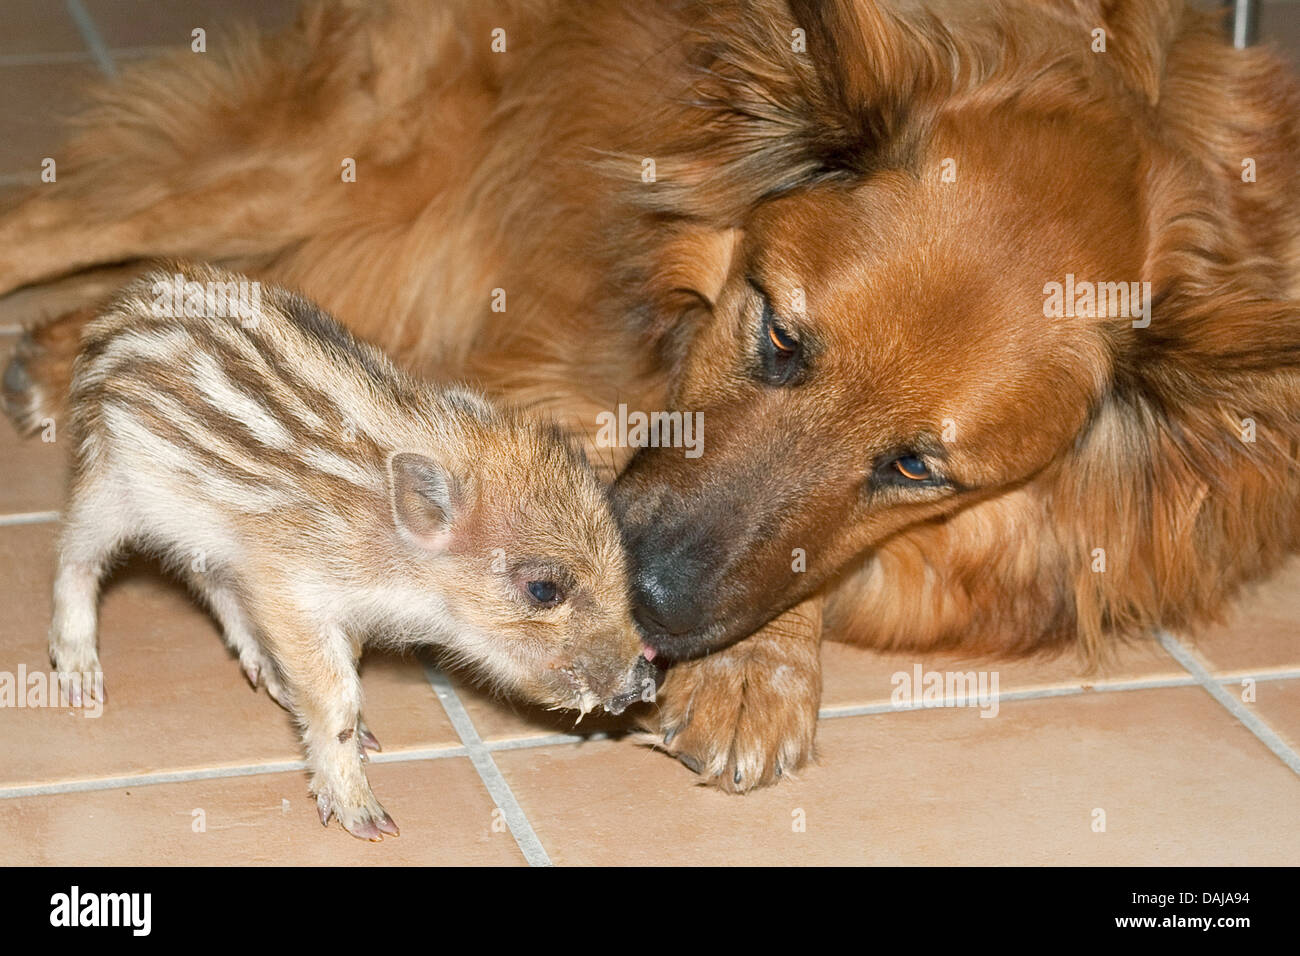 wild boar, pig, wild boar (Sus scrofa), dog licking a shote clean, Germany Stock Photo